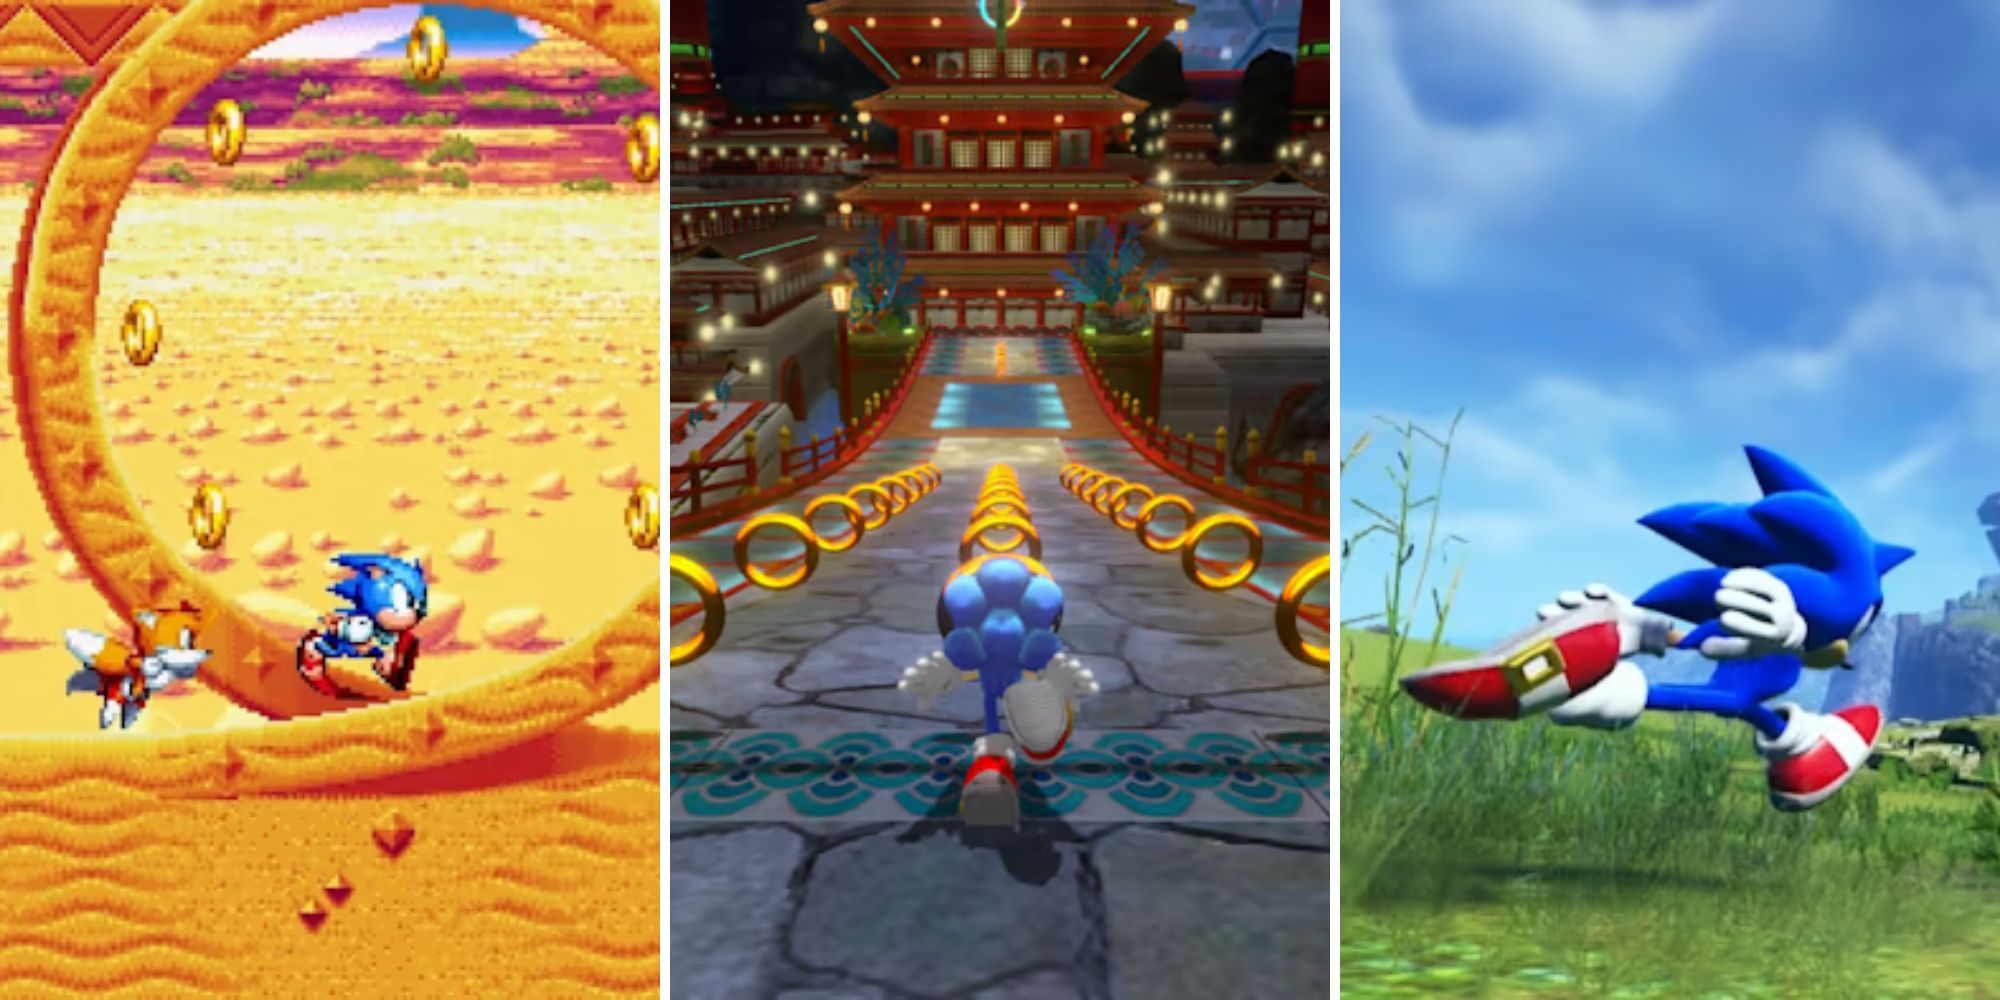 15 Best Sonic Games Of All Time